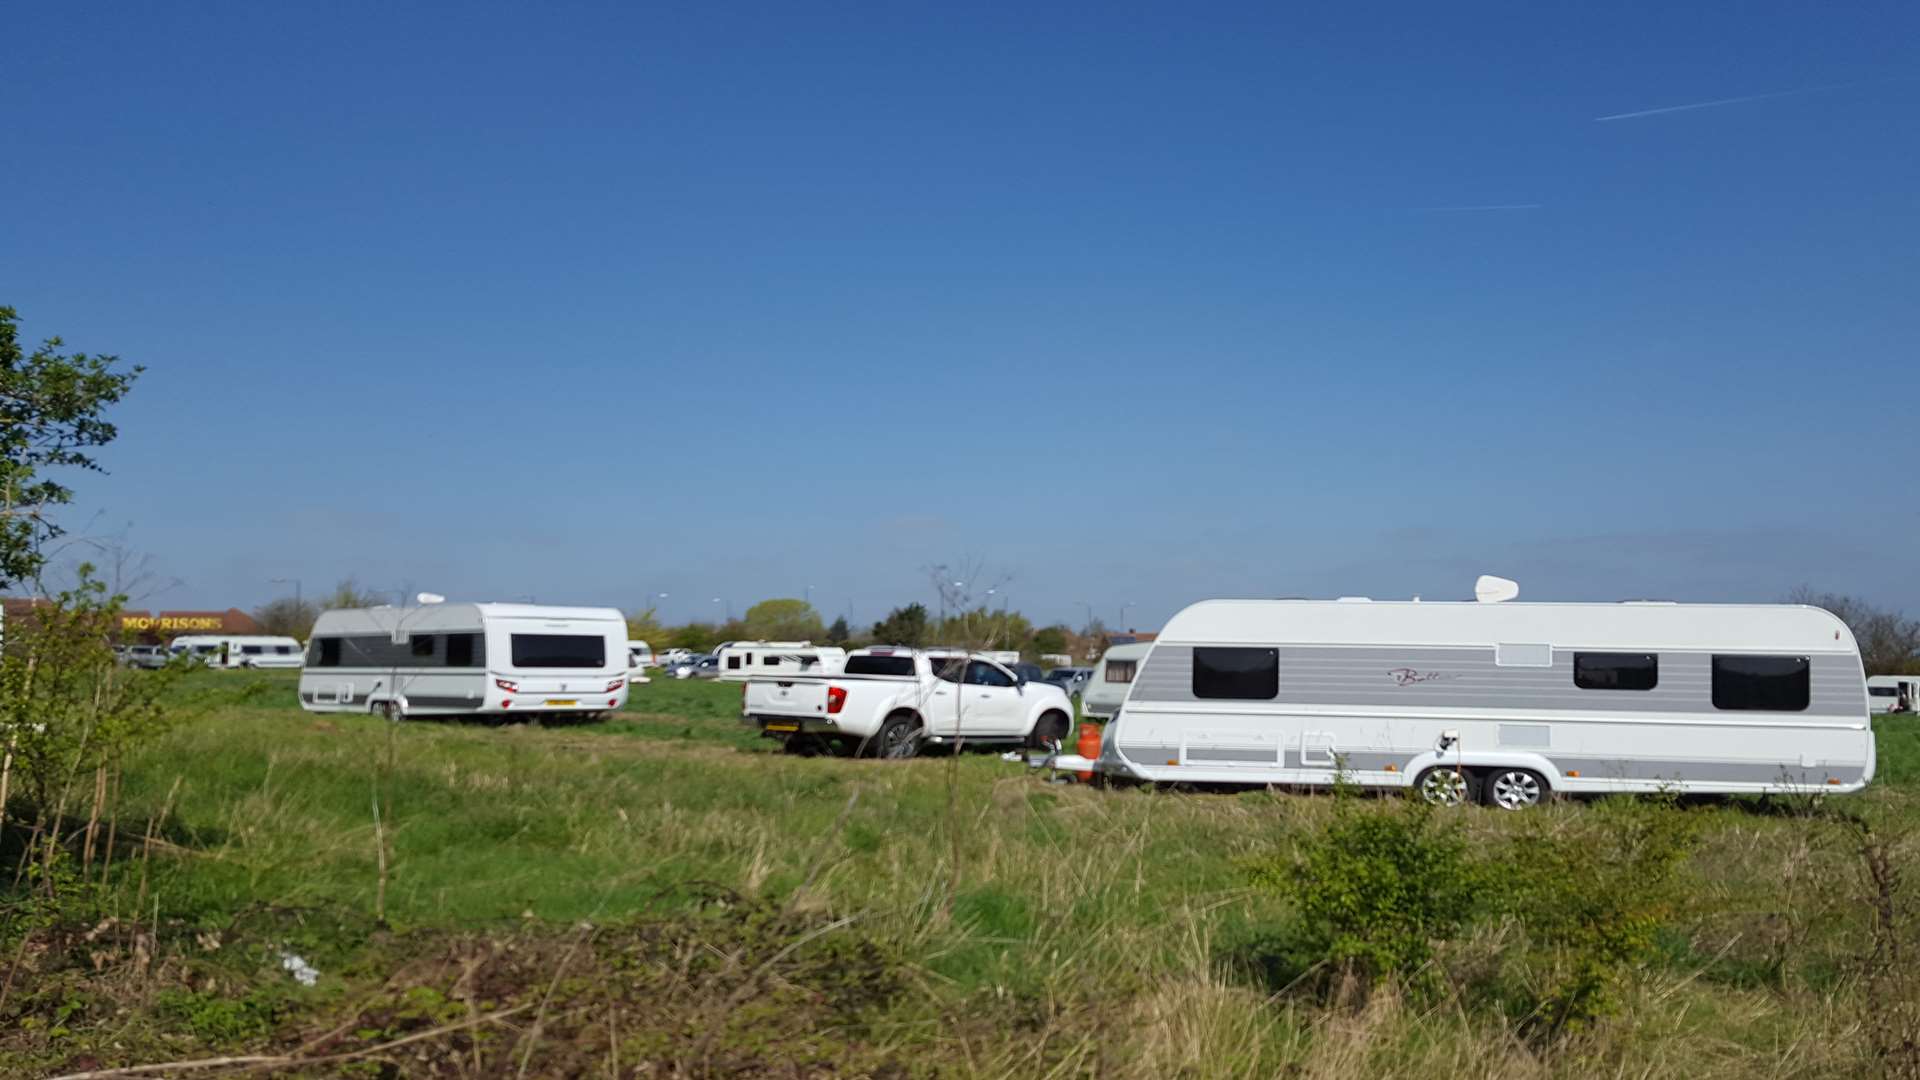 About 20 caravans and numerous other vehicles have appeared in the field